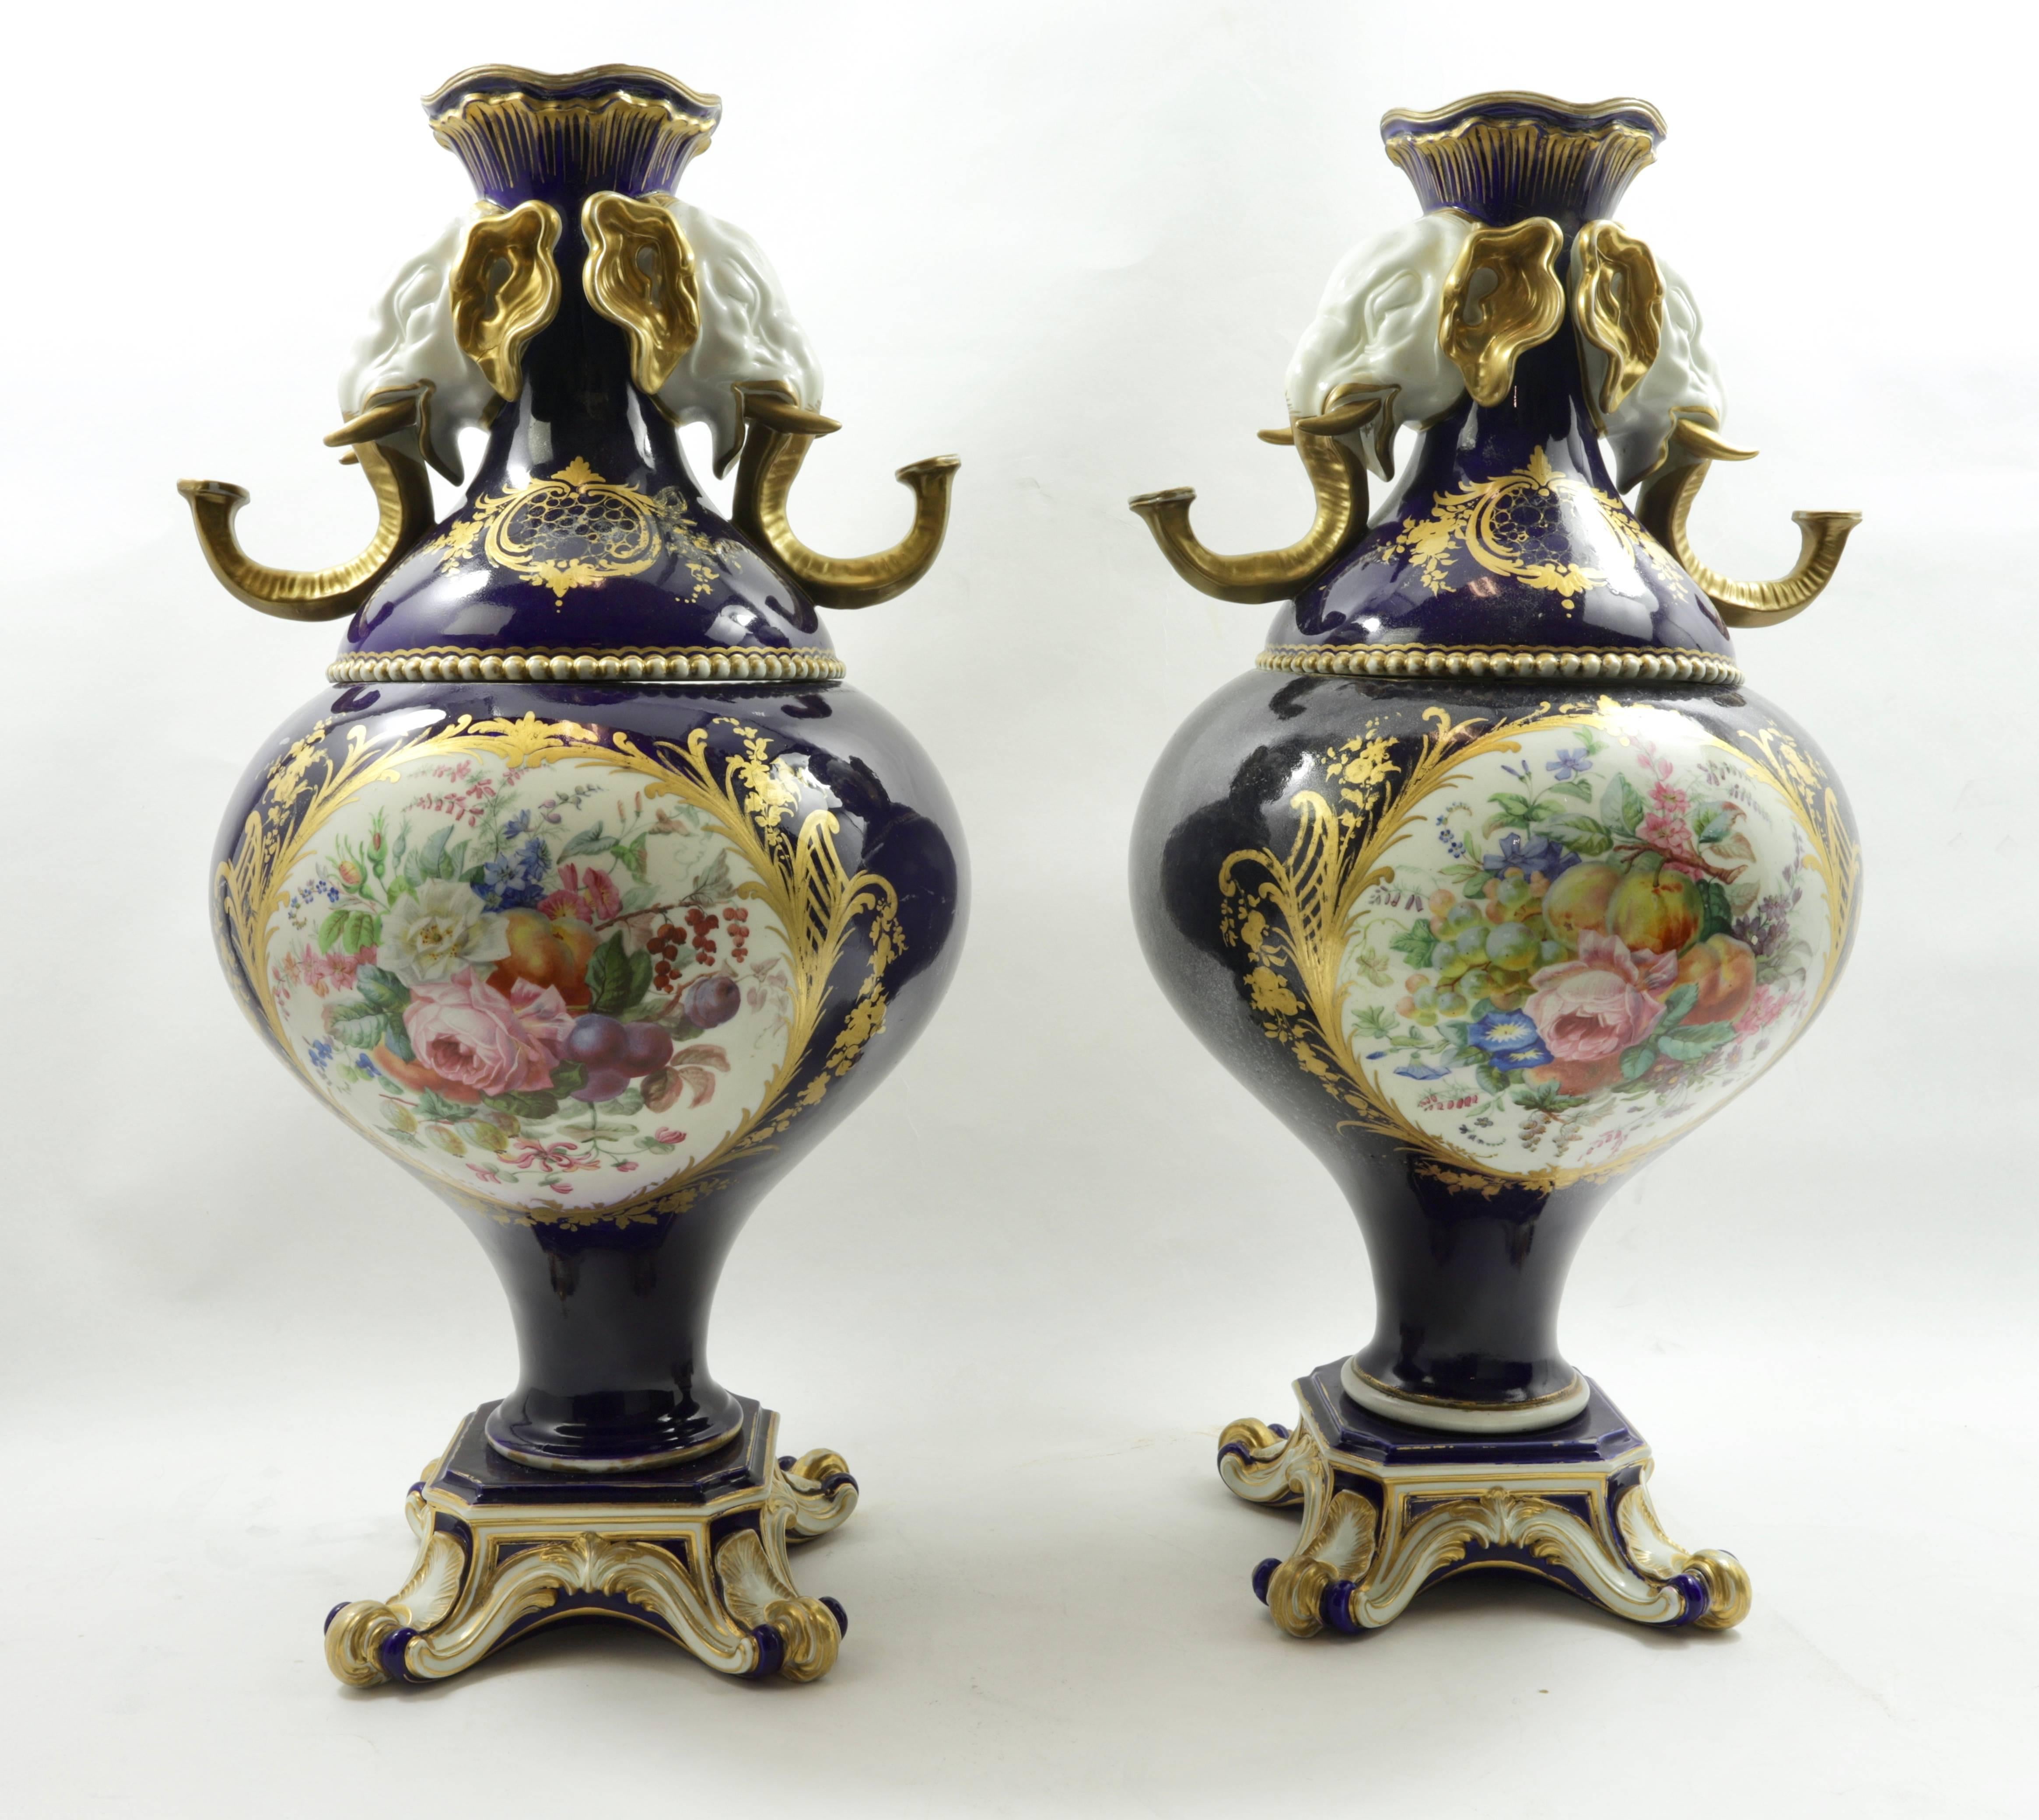 Pair of very fine quality 19th century hand-painted porcelain Sèvres style vases.
The handles are in shape of elephants heads.
This model is inspired by 18 century Sèvres vases. The painting is of highest quality.